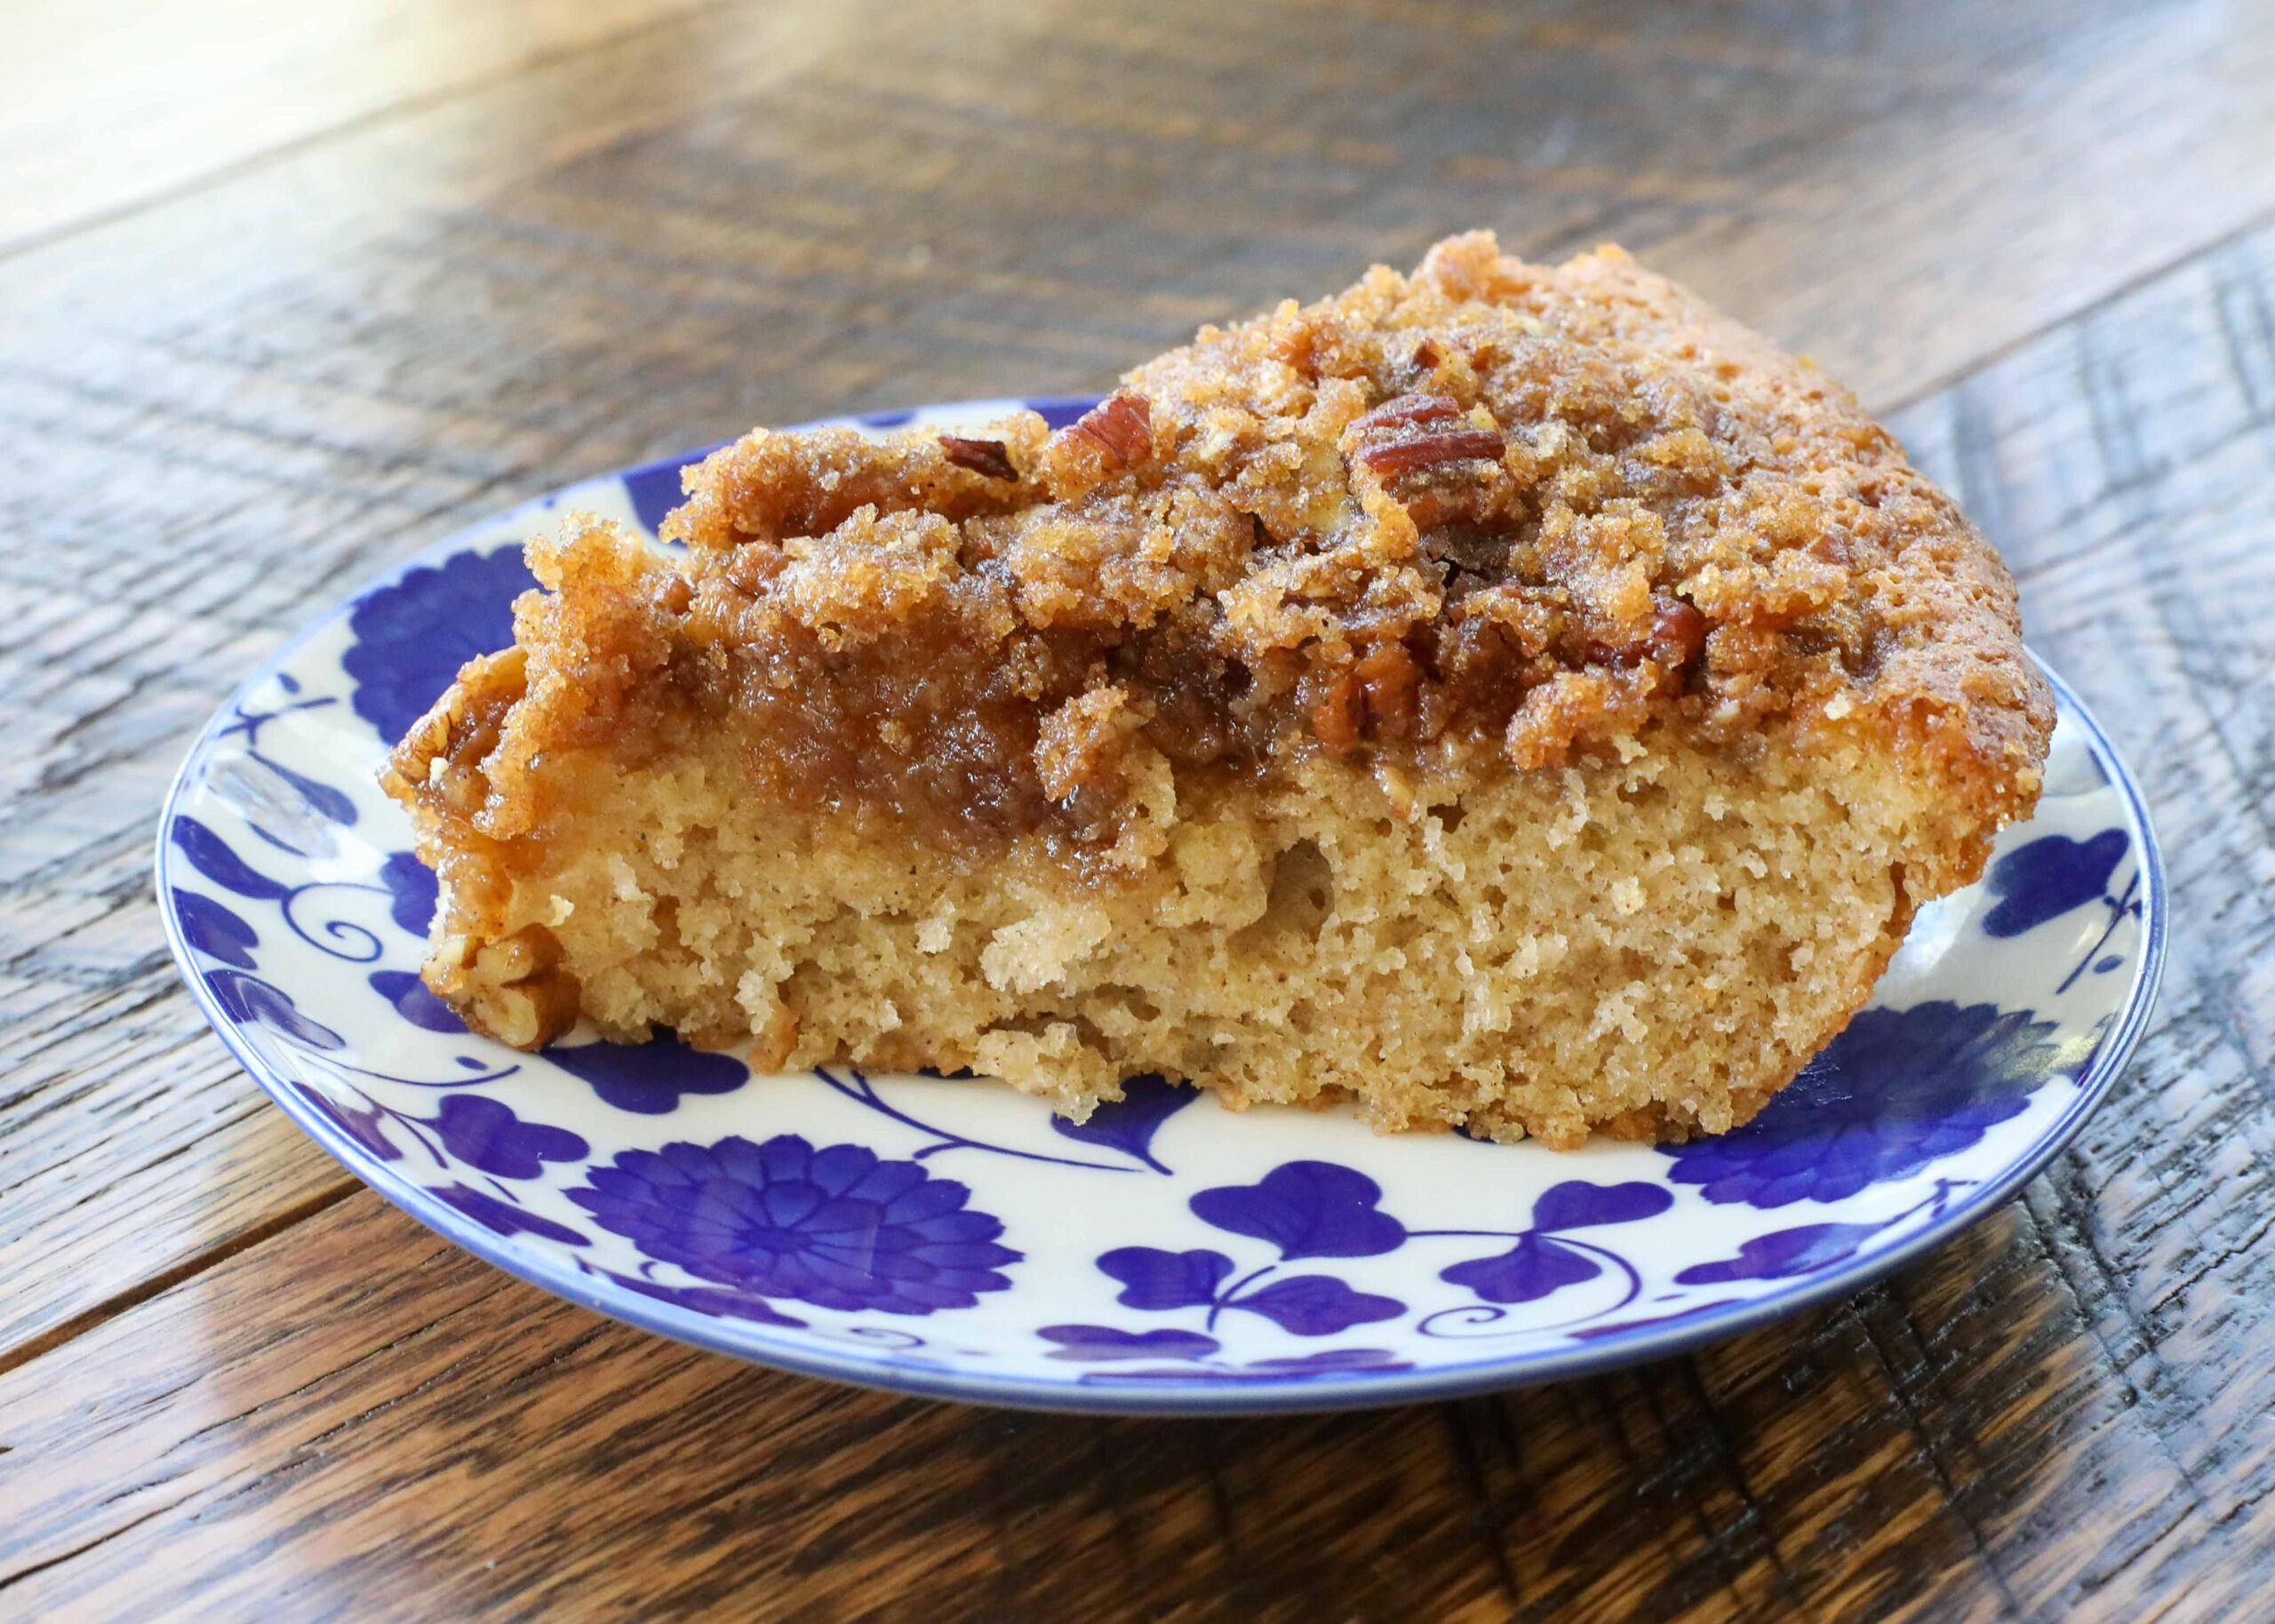  Are you ready to try something new? This buttermilk coffee cake recipe is a must-try!